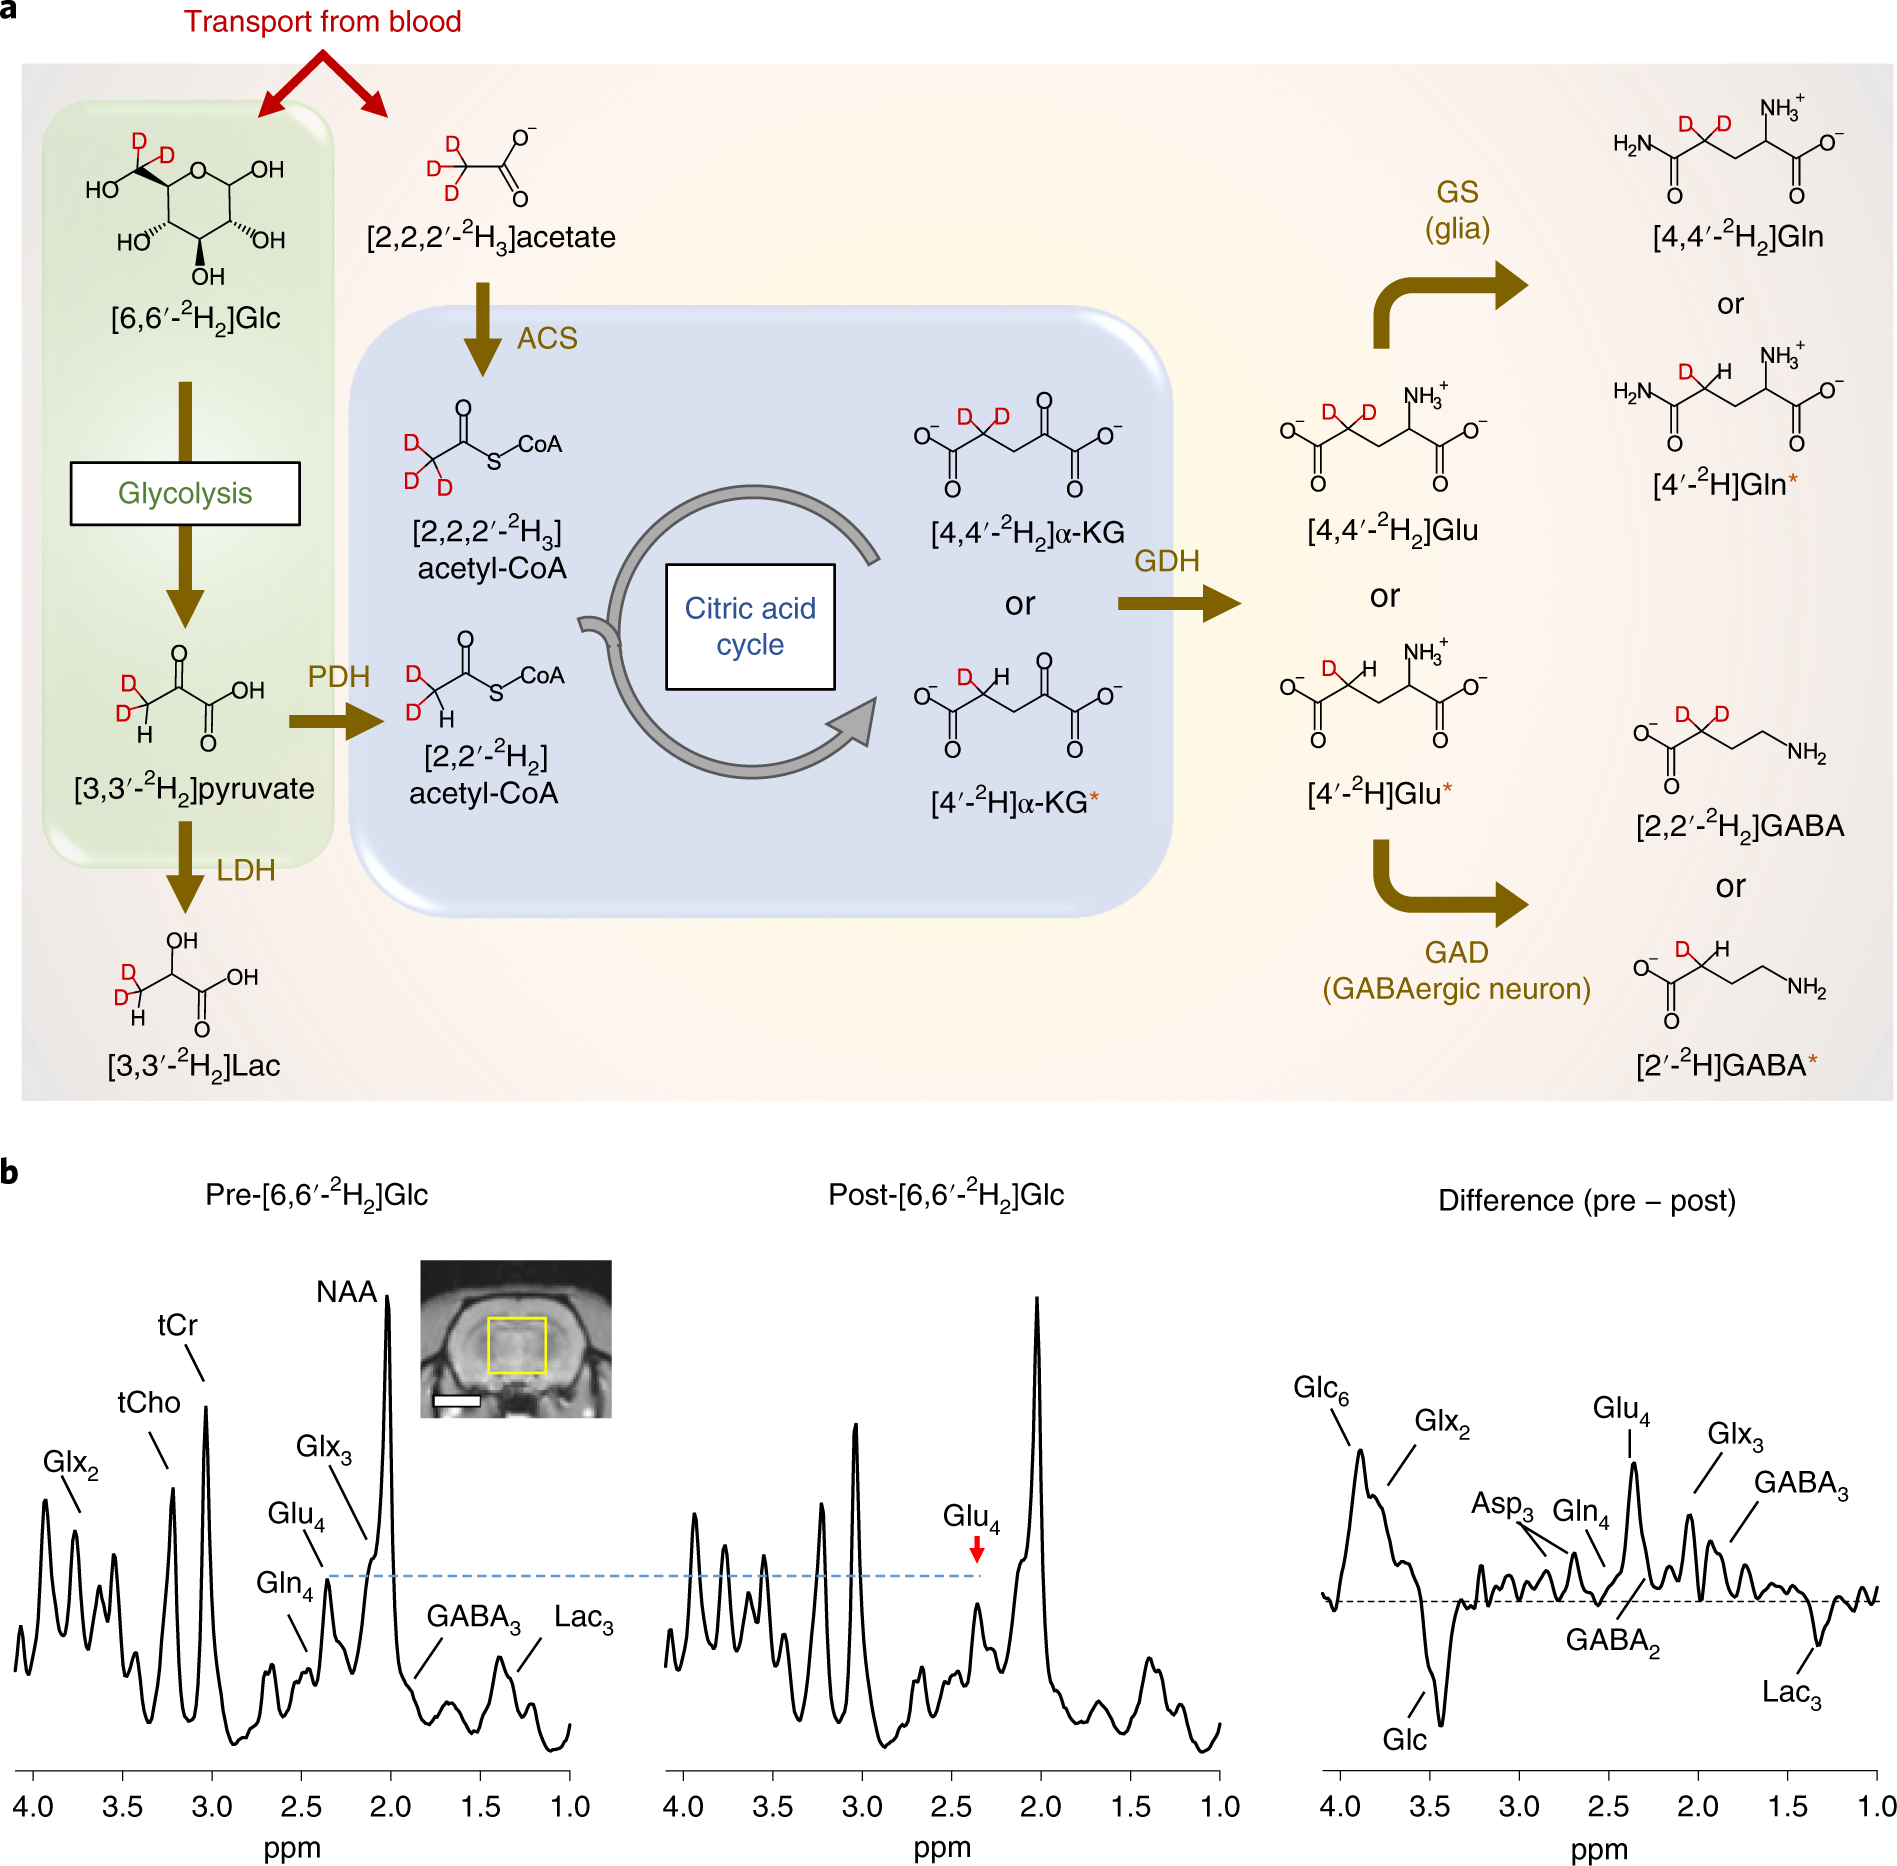 1H magnetic resonance spectroscopy of 2H-to-1H exchange quantifies the  dynamics of cellular metabolism in vivo | Nature Biomedical Engineering